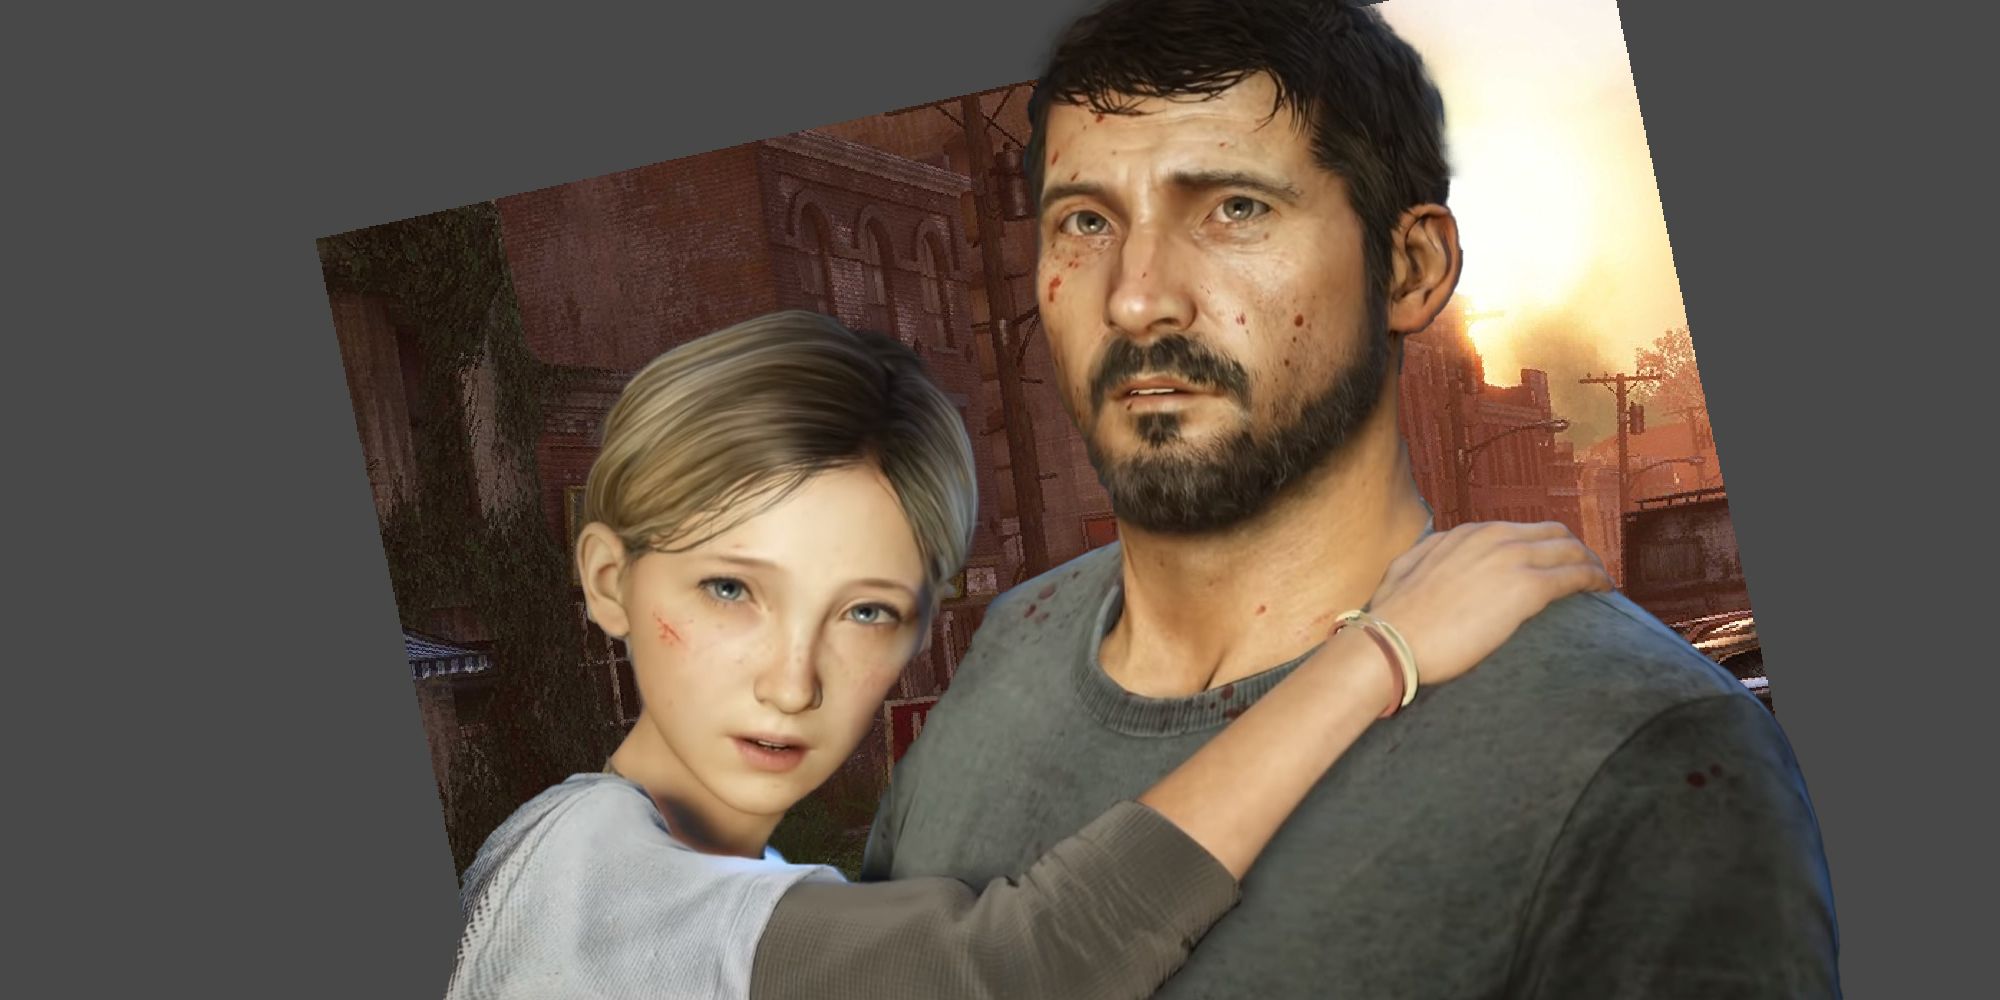 If The Last of Us 2 gets DLC, I think it should be about (OPEN SPOILERS)